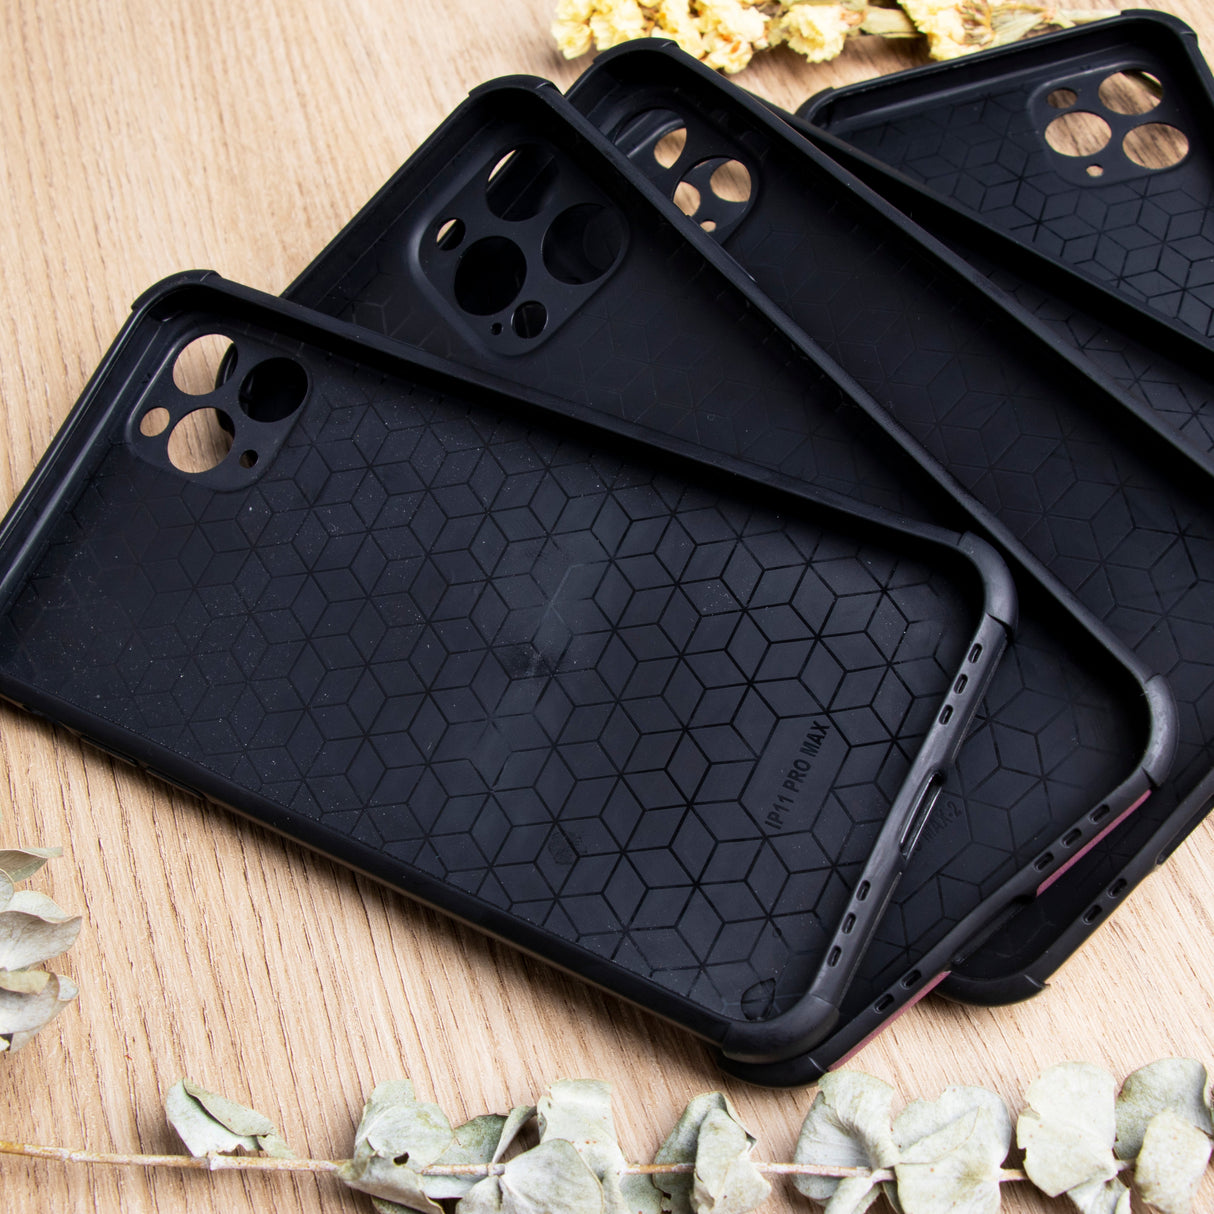 Gex Personalized Engraved Leather iPhone Cases - GexWorldwide